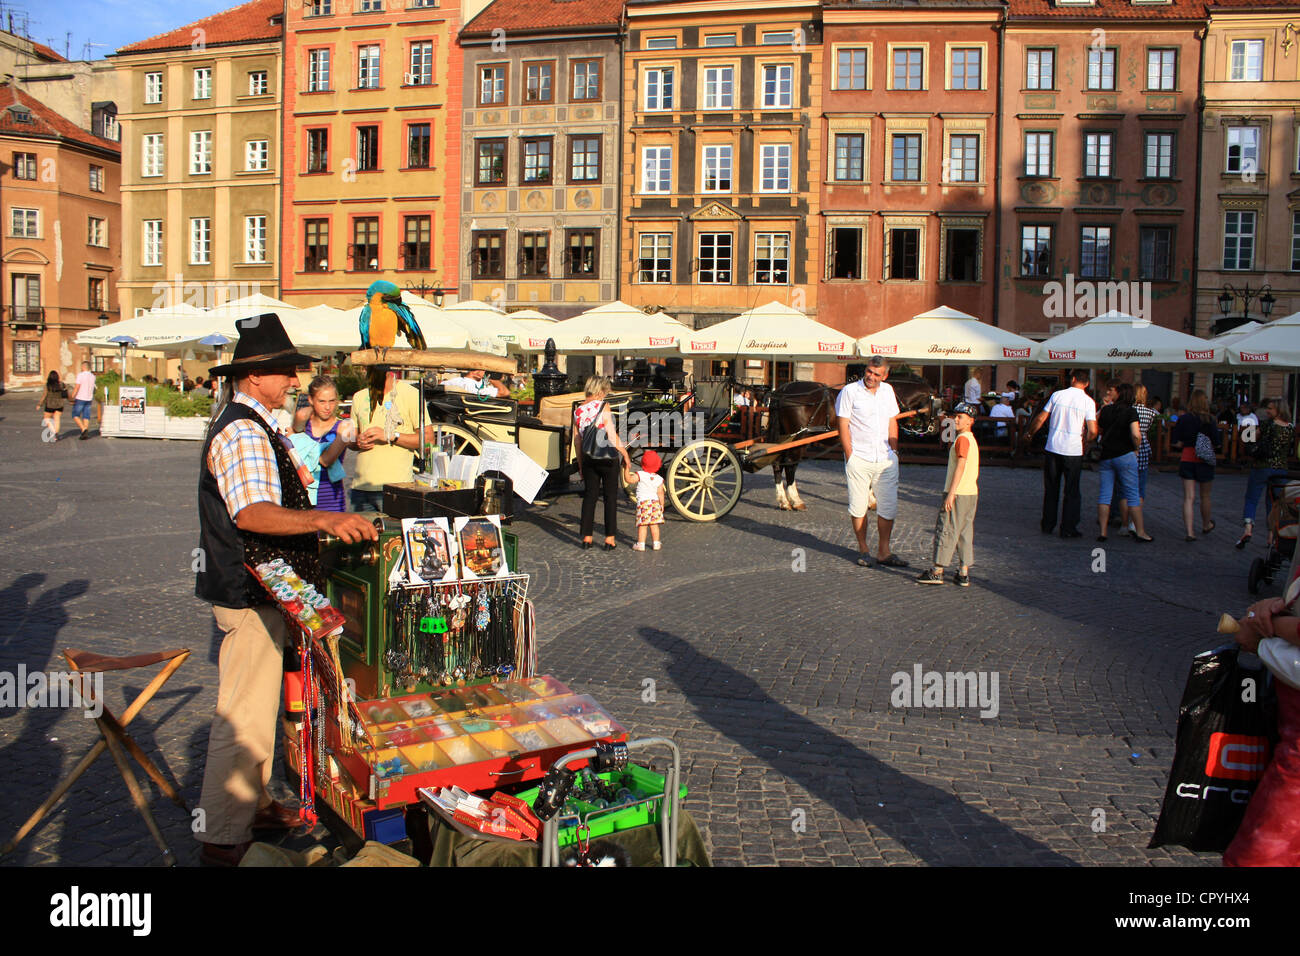 Life in Warsaw in the old town market square with organ grinder and crowd of people Stock Photo